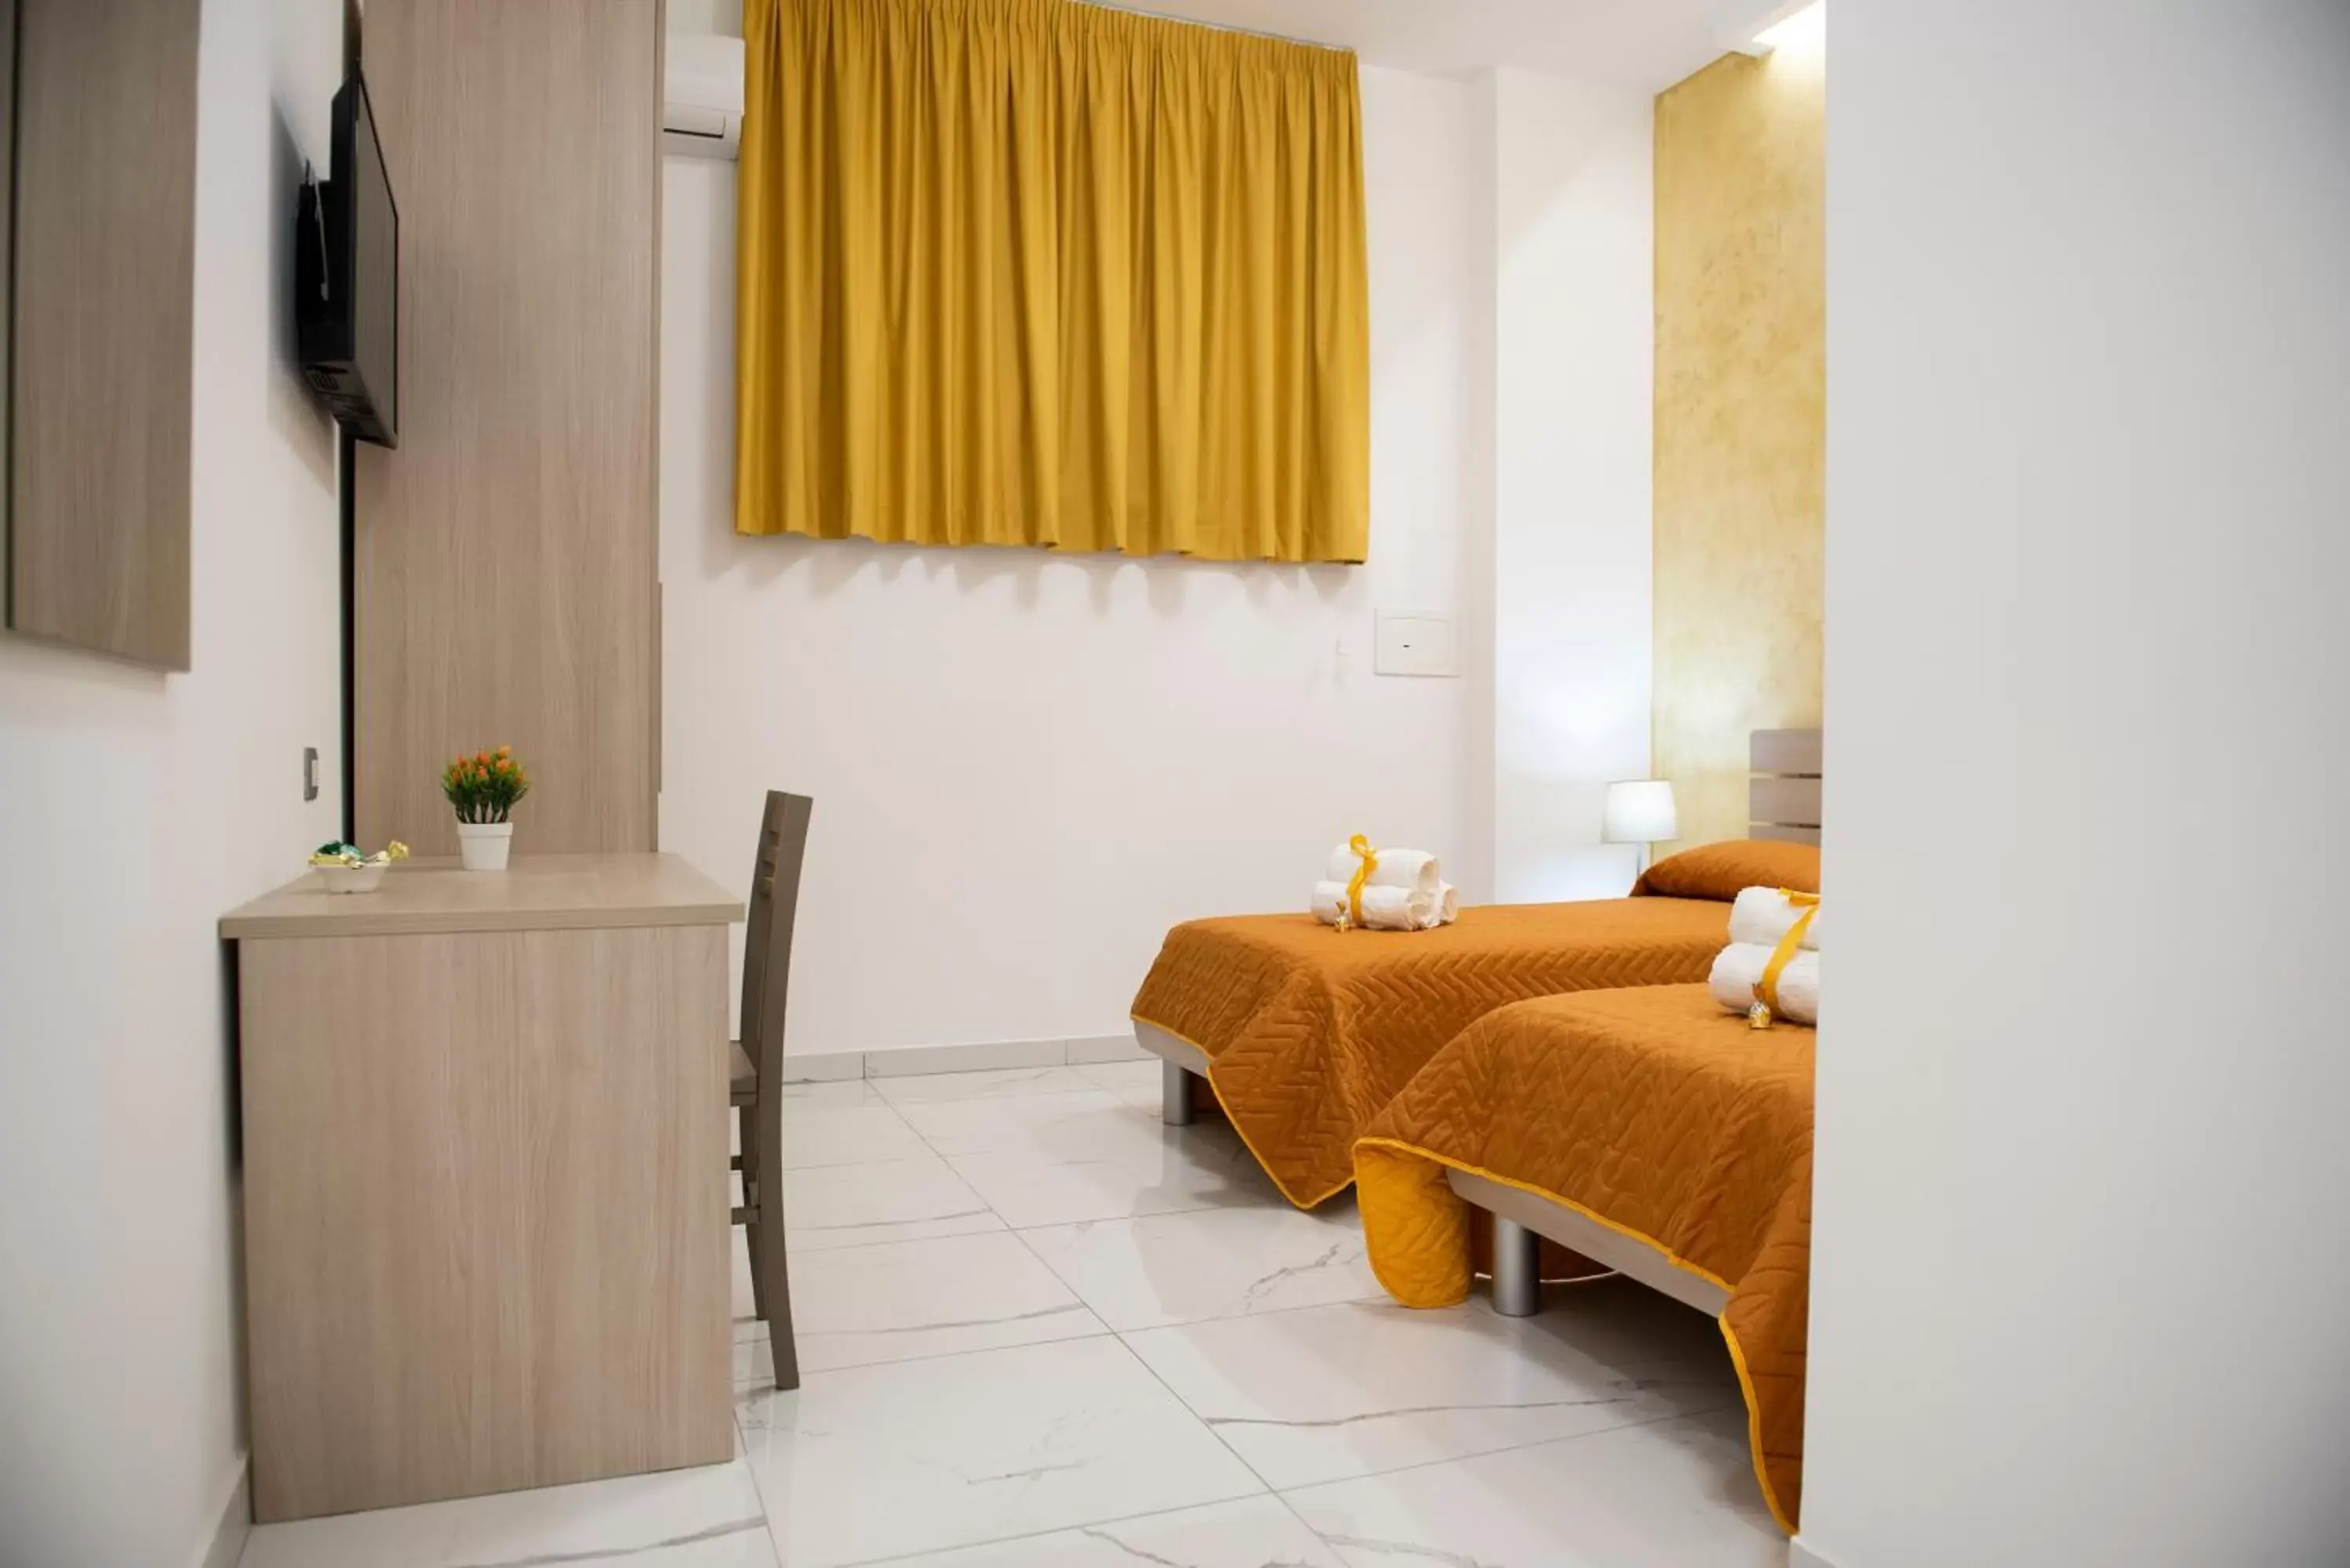 Stabia Dream Rooms